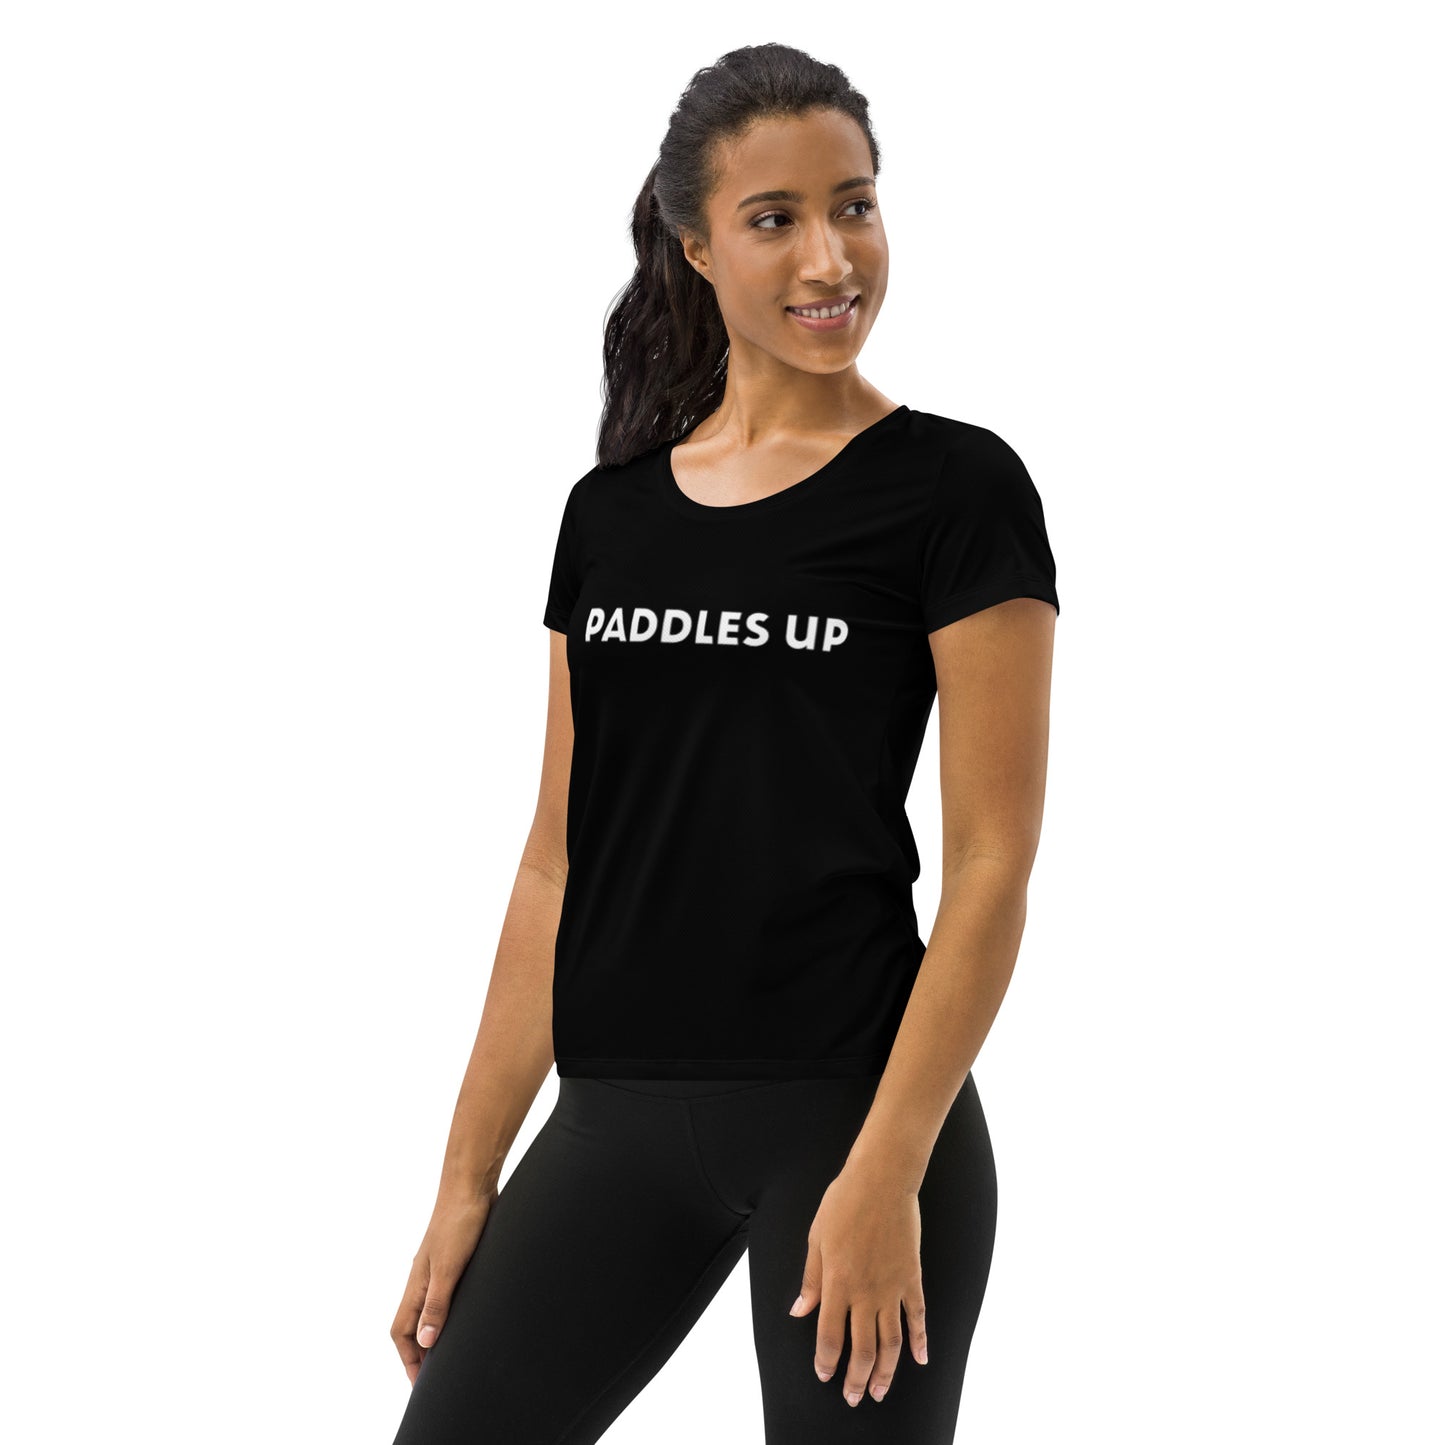 Paddle's Up Women's Athletic T-Shirt